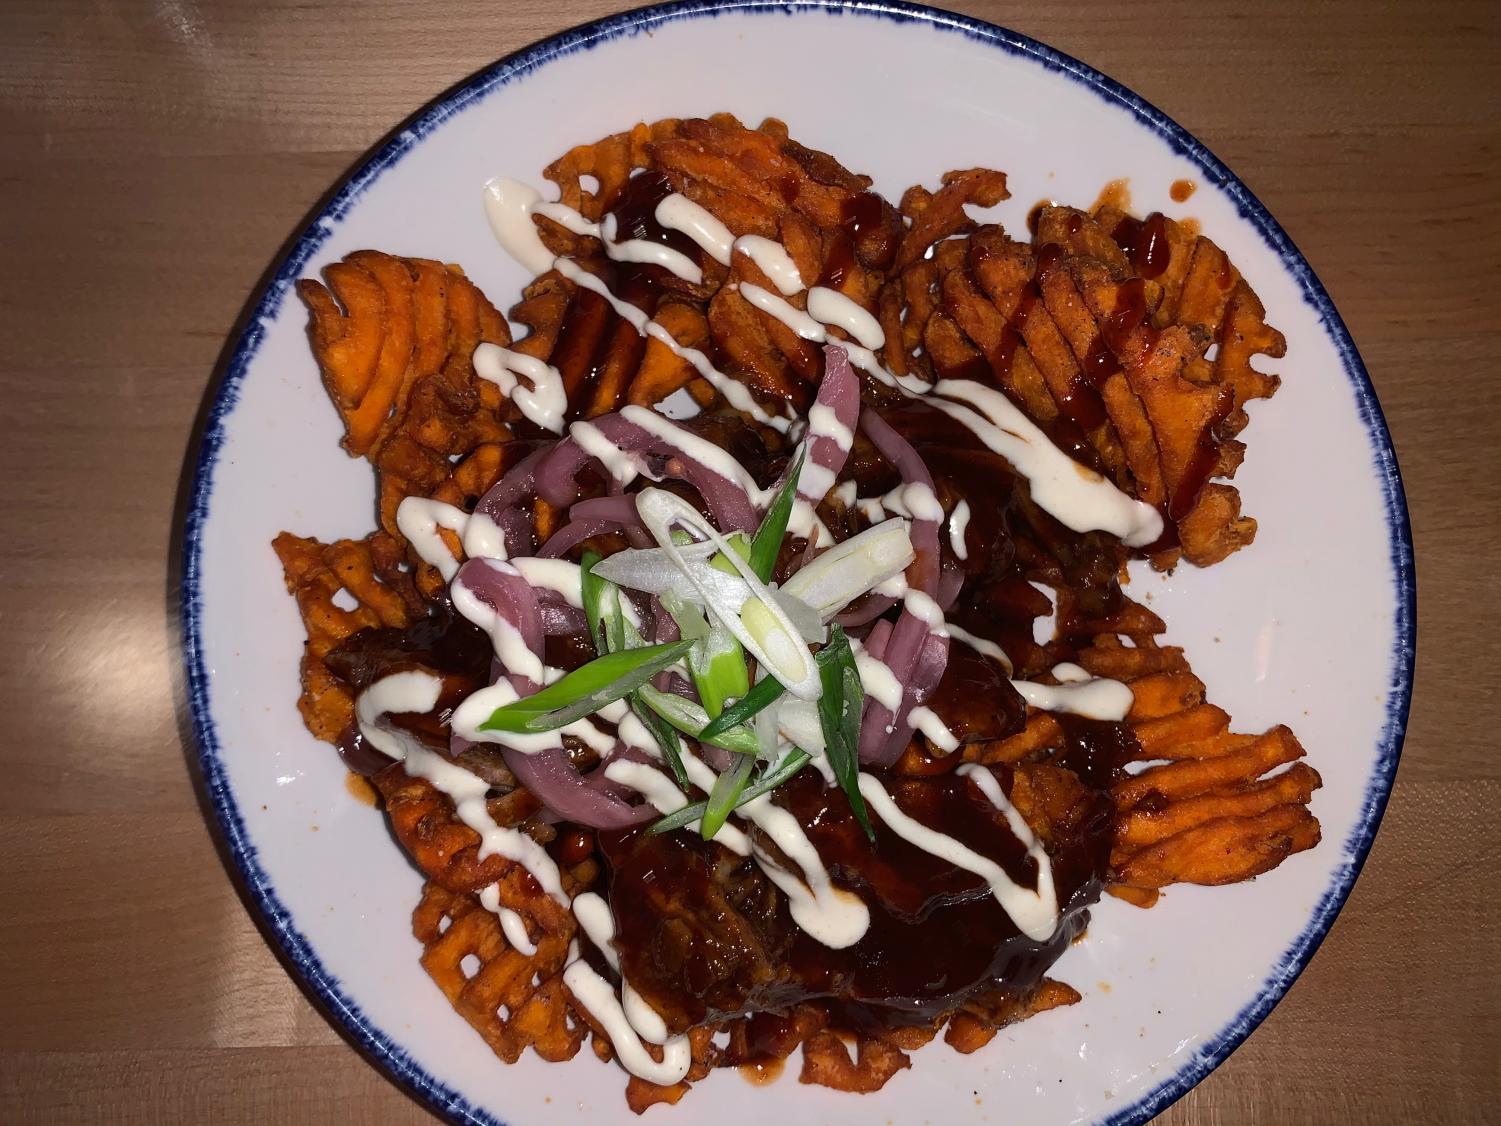 Sweet potato BBQ fries at new Southern eatery: Jaspers (Hustler Staff/Sophie Edelman)